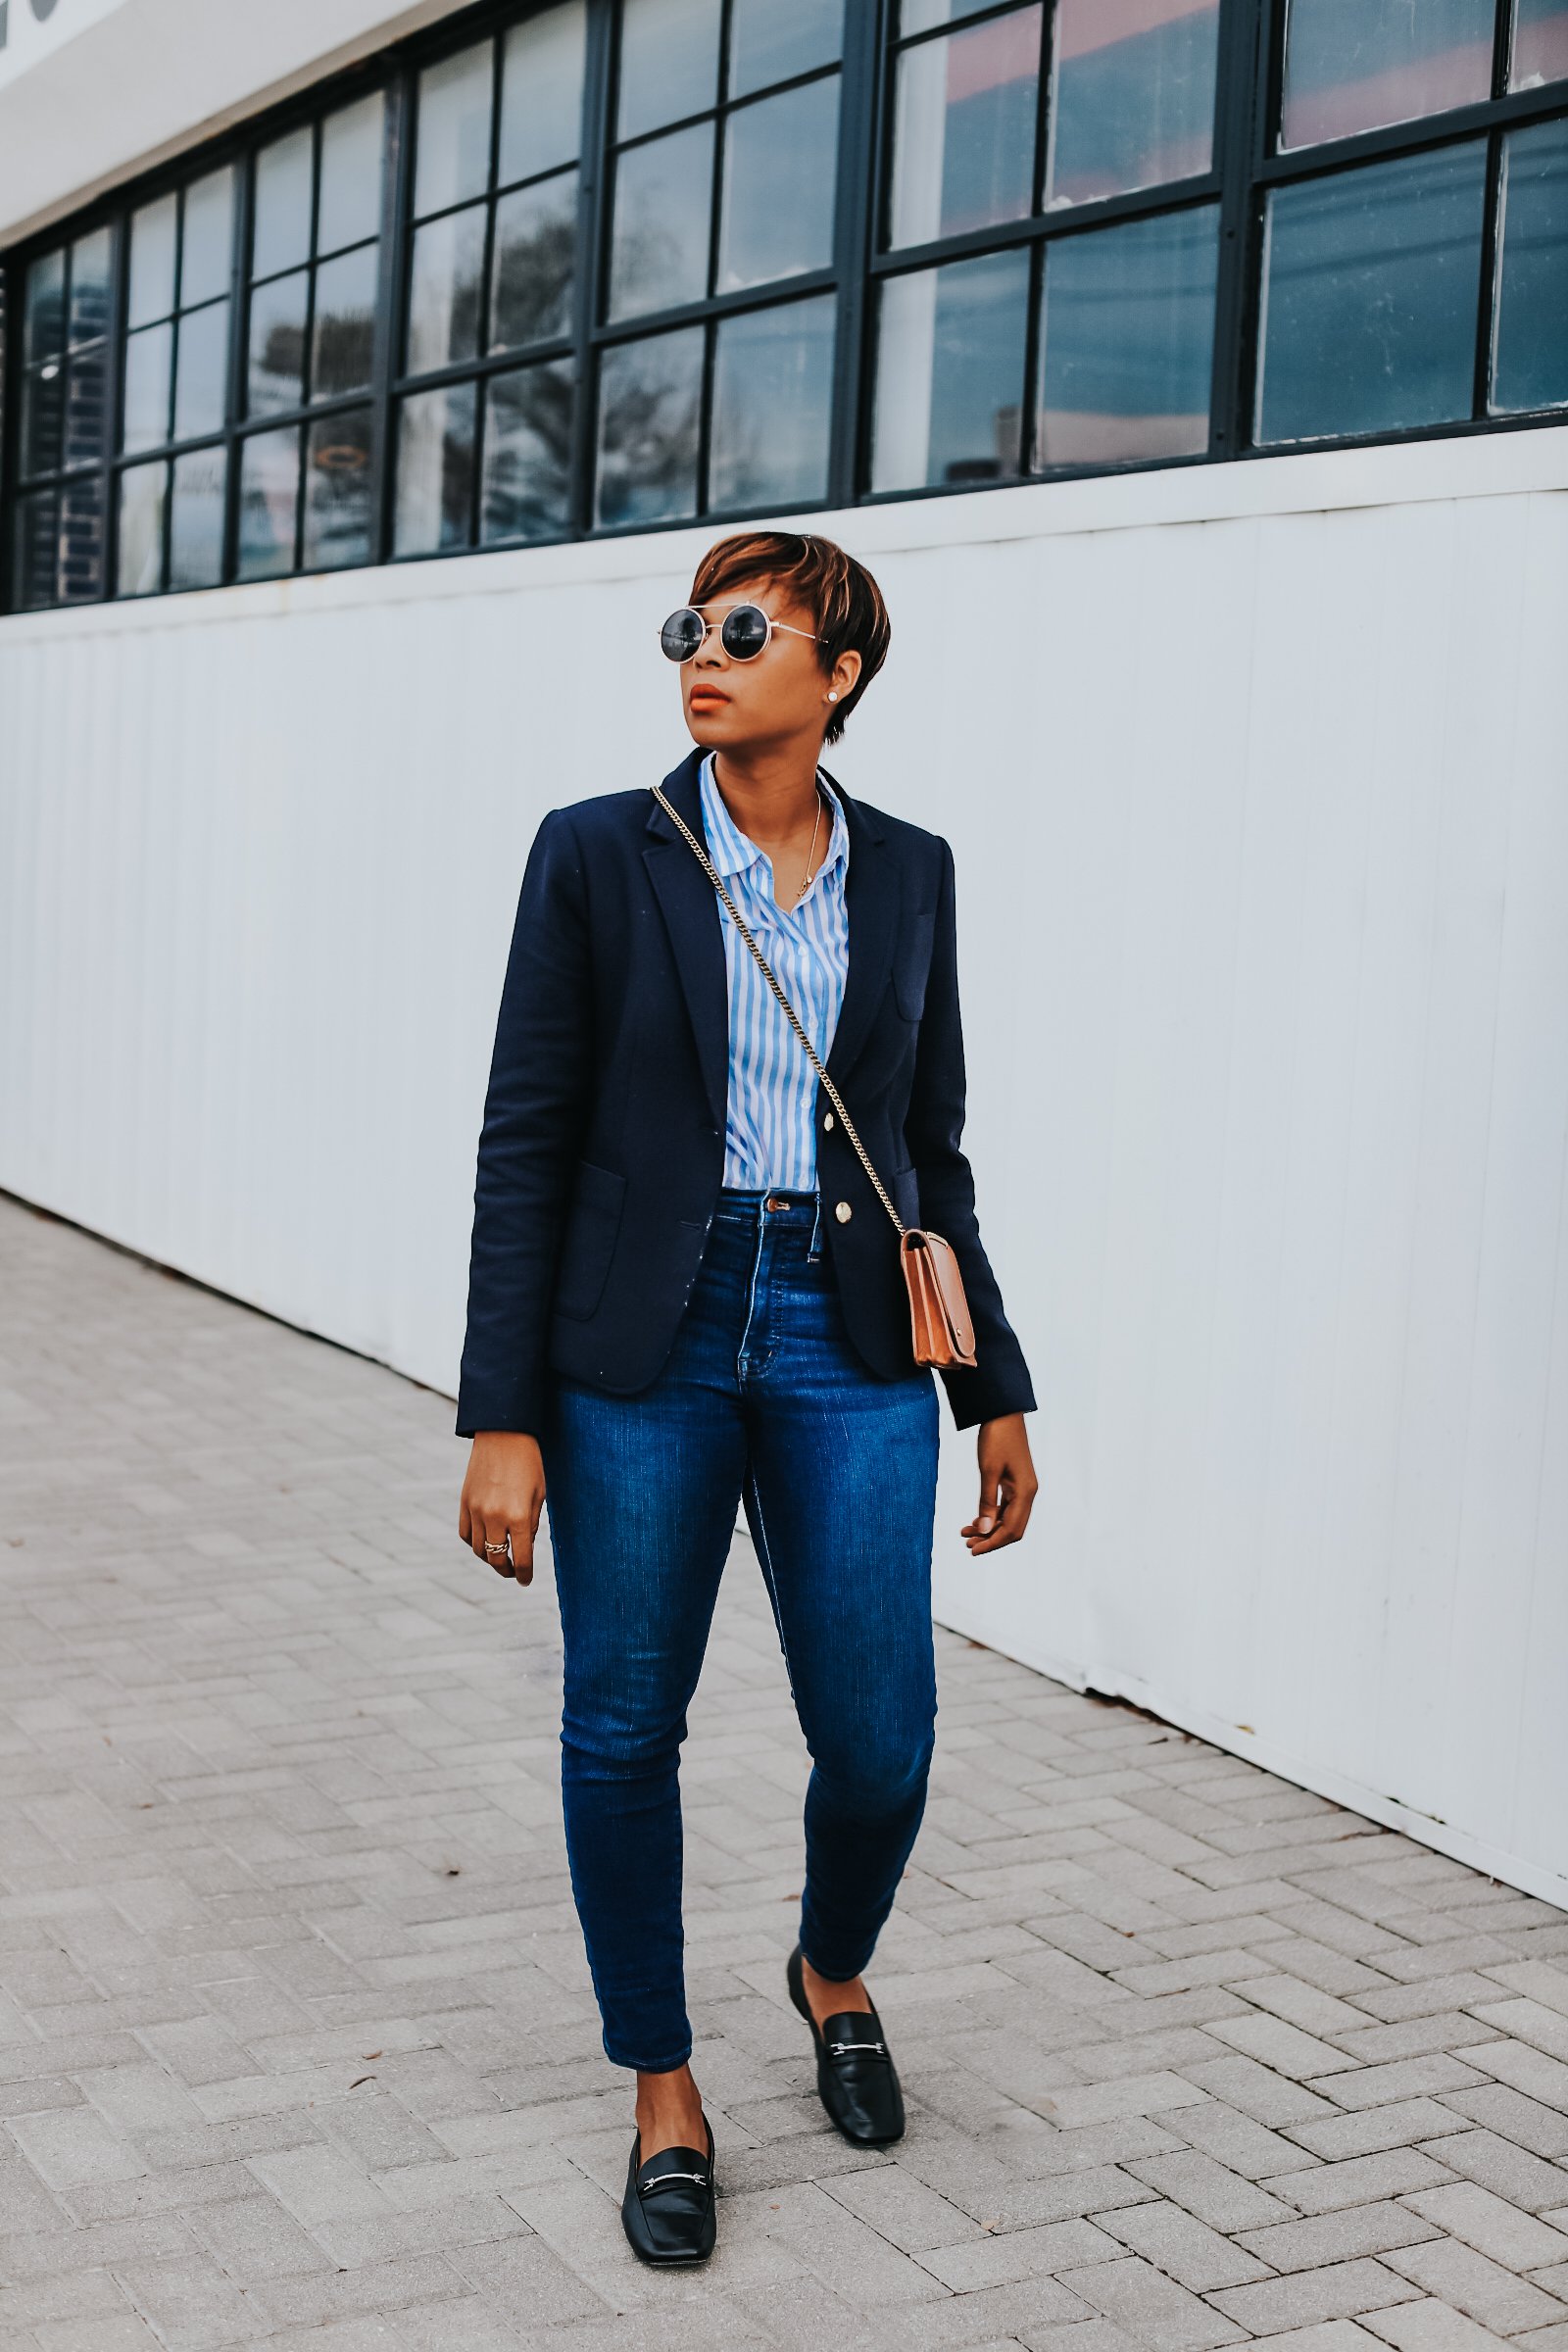 Mary's Little Way in A Navy Blazer, a Blue and White Striped Boyfriend Shirt, Blue Jeans, and Able Black Loafers